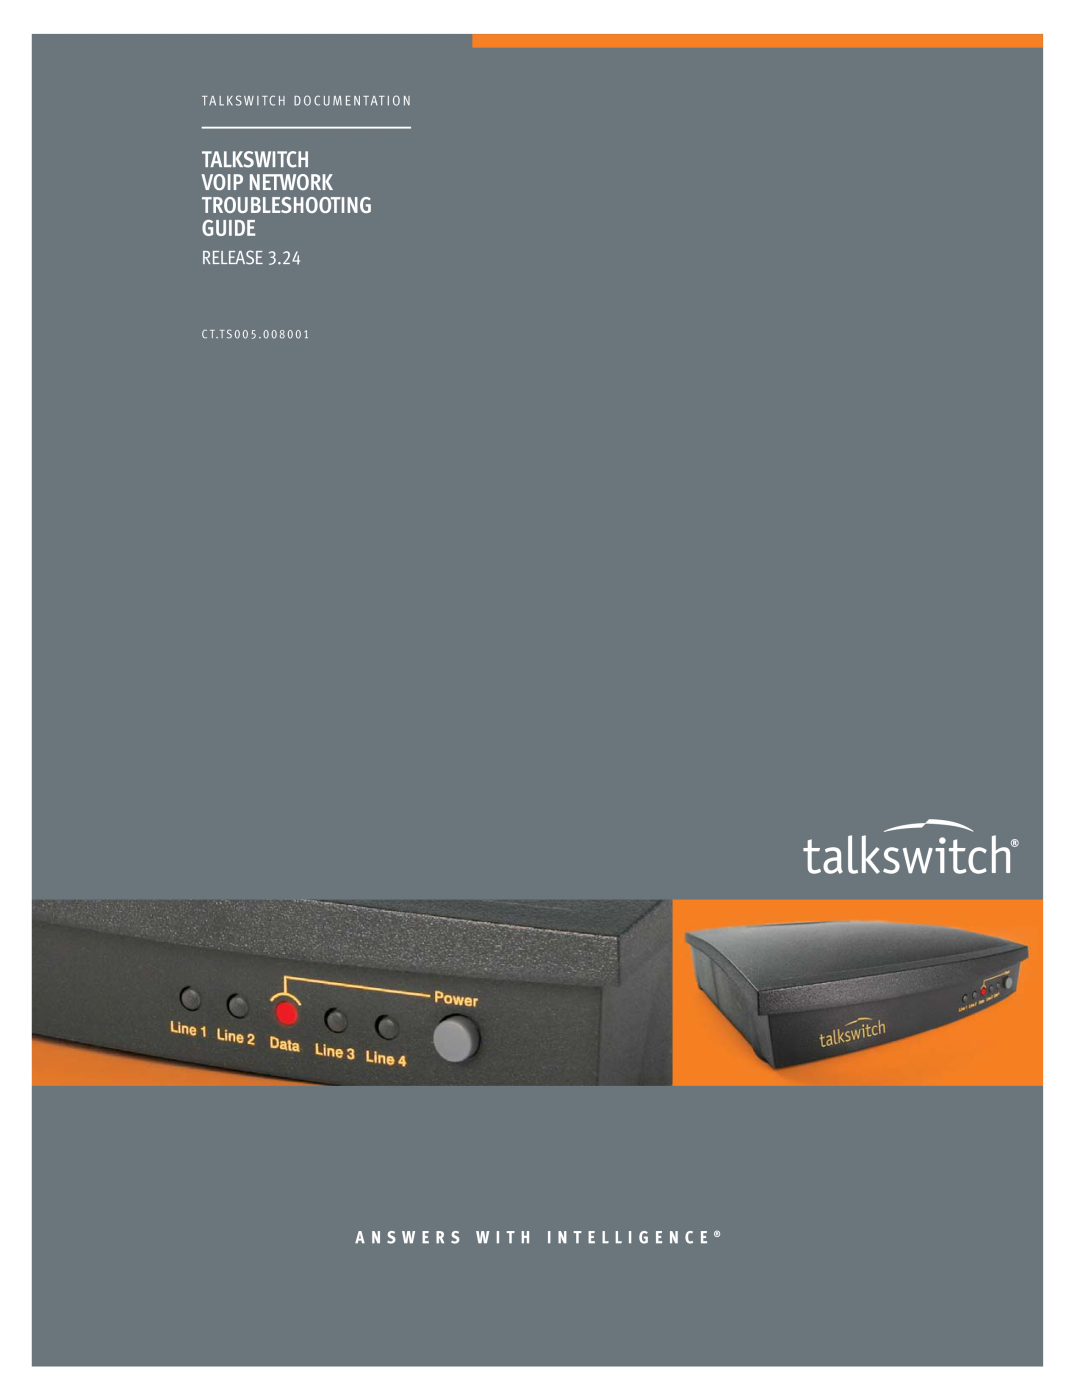 Talkswitch 3.24 manual Release, Talkswitch Voip Network Troubleshooting Guide, C T .T S 0 0 5 . 0 0 8 0 0 